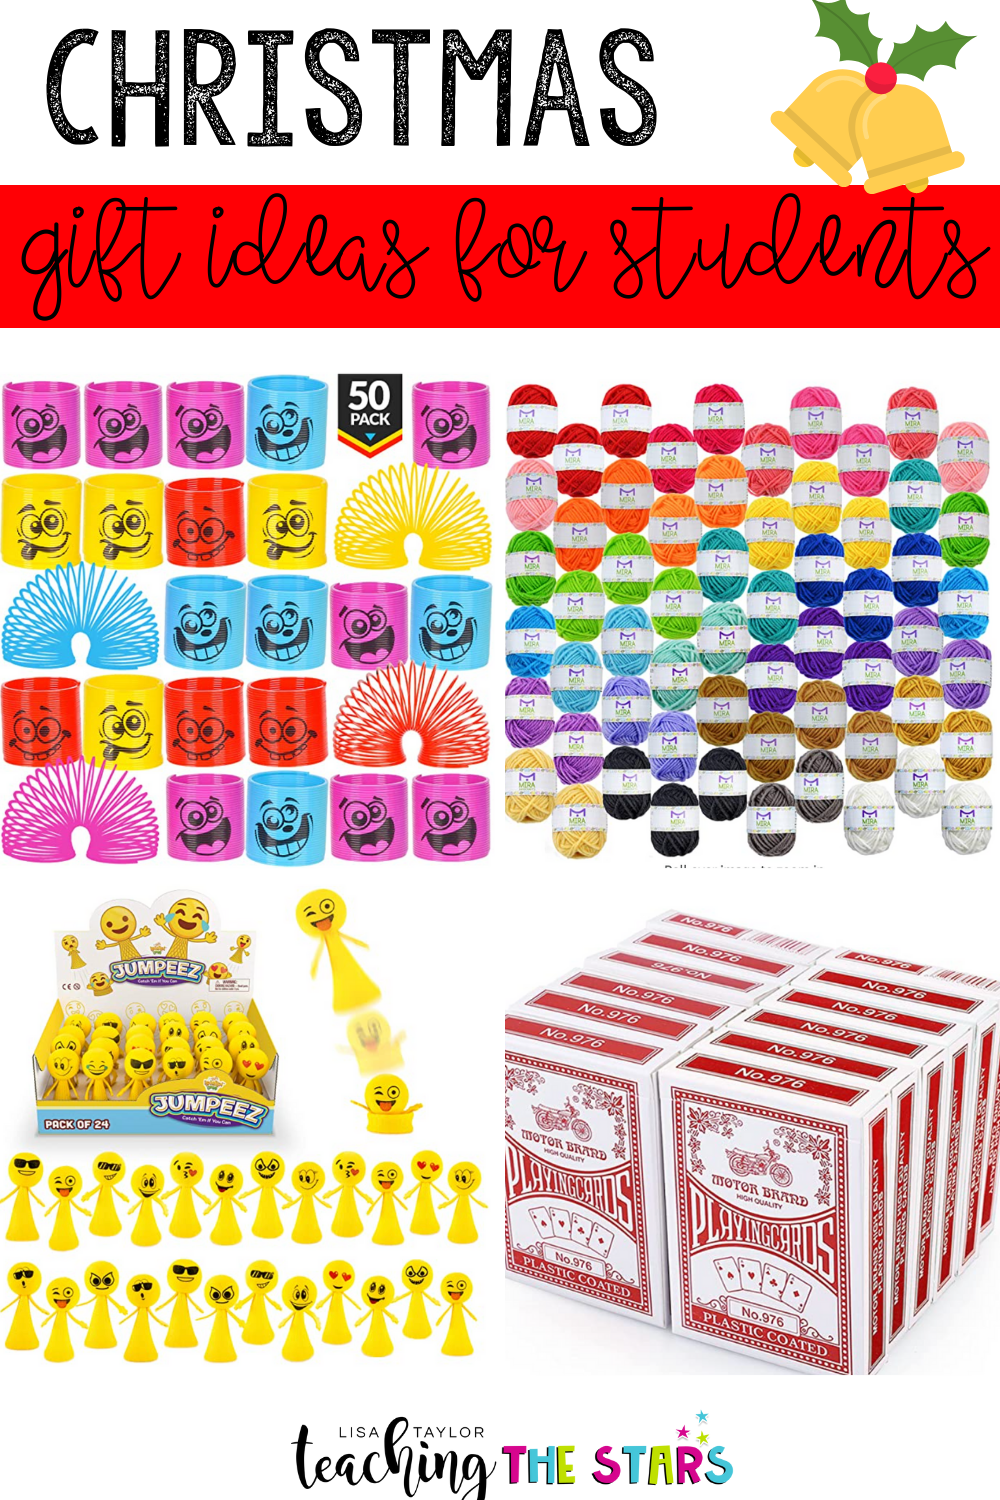 6 Inexpensive Valentine's Day Gift Ideas for Kids - Amy Lemons